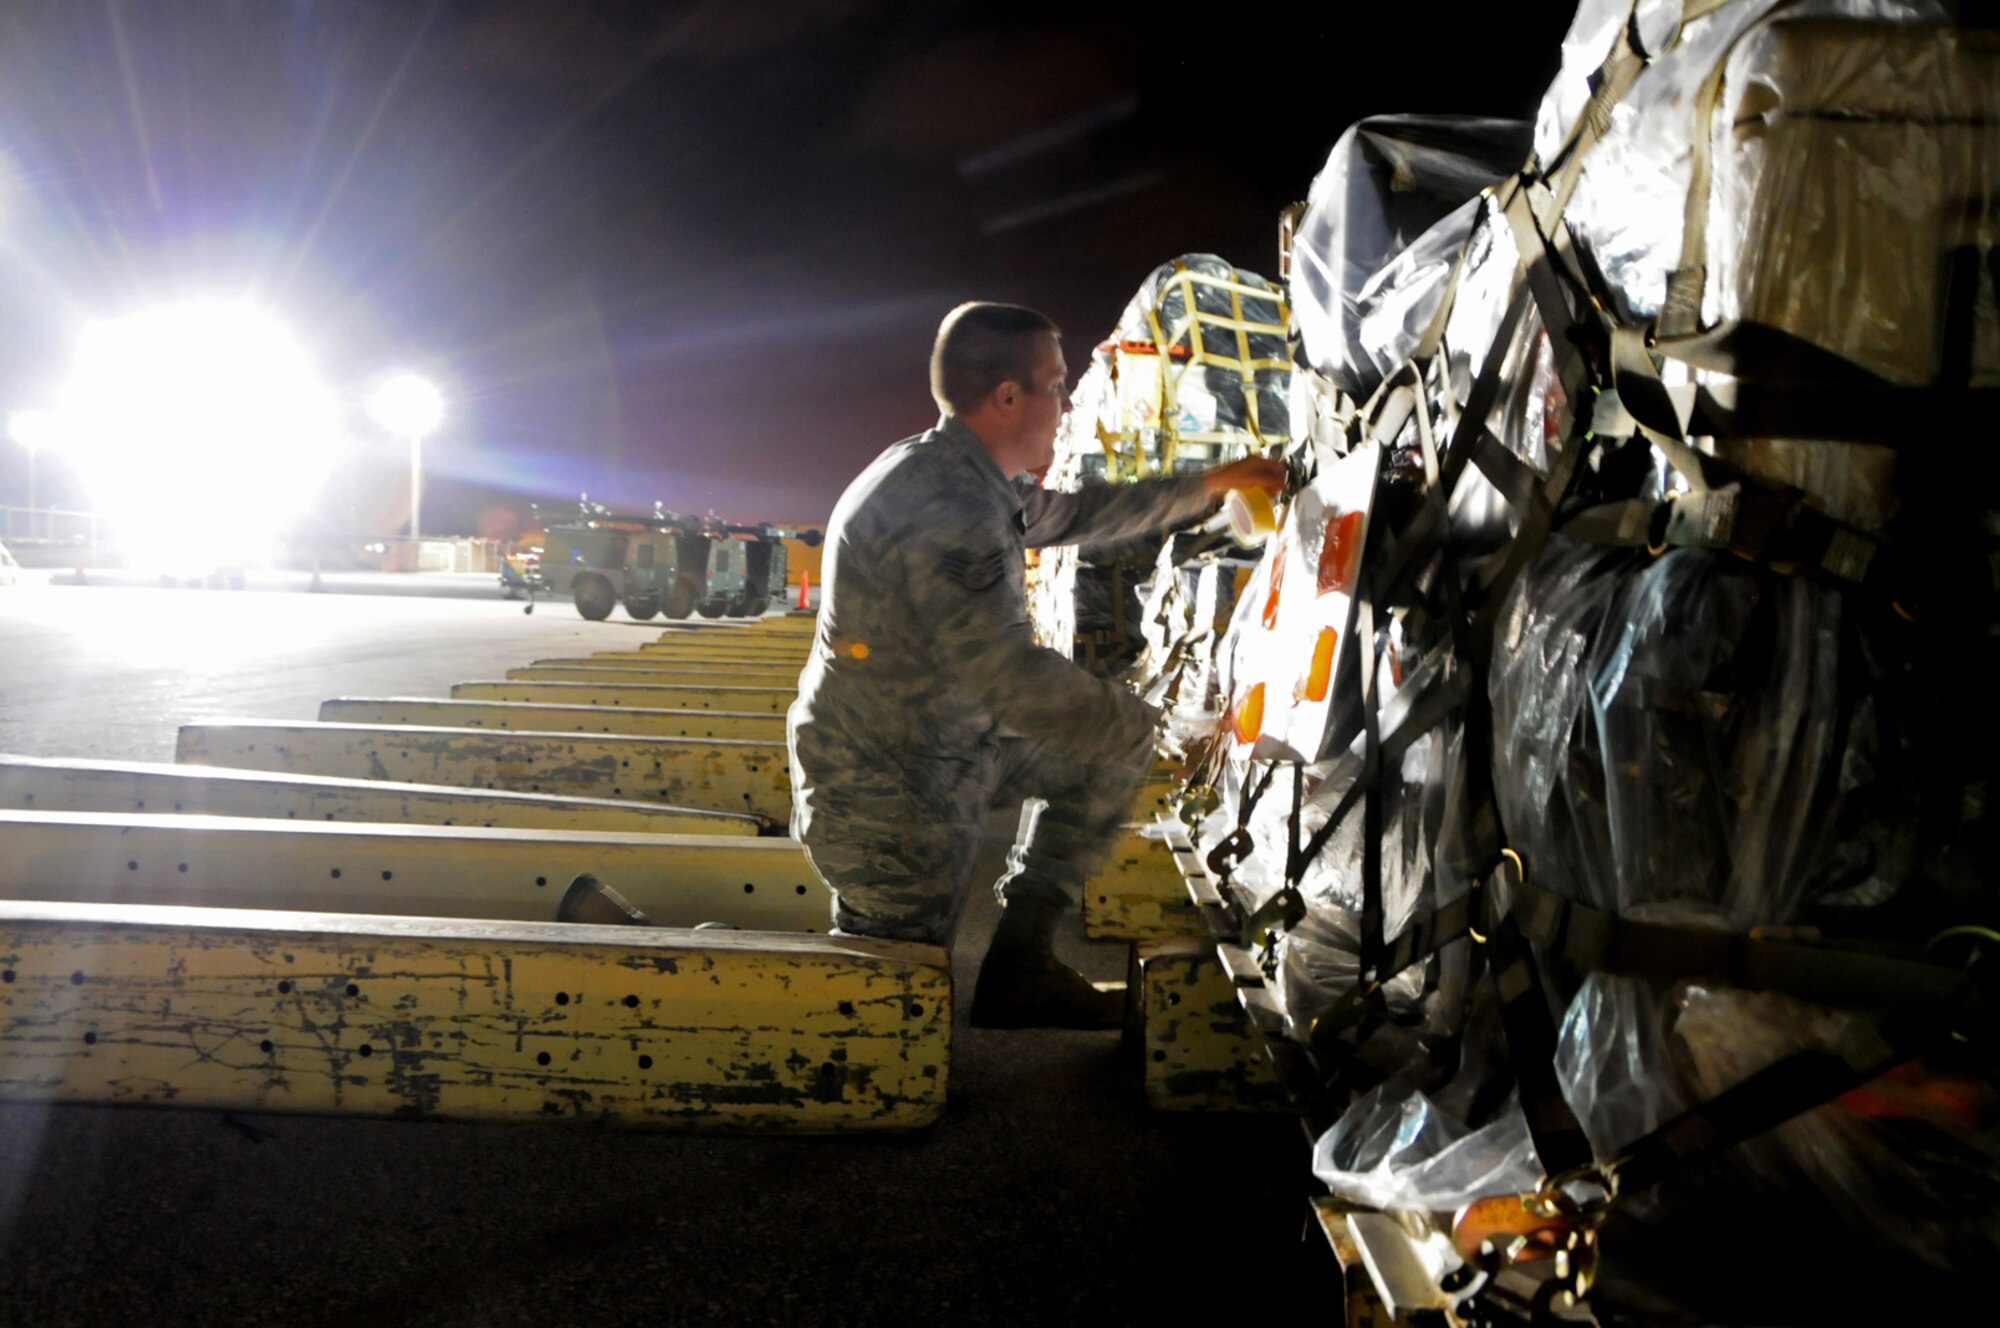 Staff Sgt. Scott Irwin, 644th Combat Communications Squadron cyber network operations supervisor, labels a pallet for transport in the aerial port during Operational Readiness Exercise Beverly Palm 13-01 at Andersen Air Force Base, Guam, Jan. 14, 2013. During Beverly Palm 13-01, executed from Jan. 13-16, Andersen practiced mobilization with Osan Air Base, South Korea. (U.S. Air Force photo by Airman 1st Class Marianique Santos/Released)